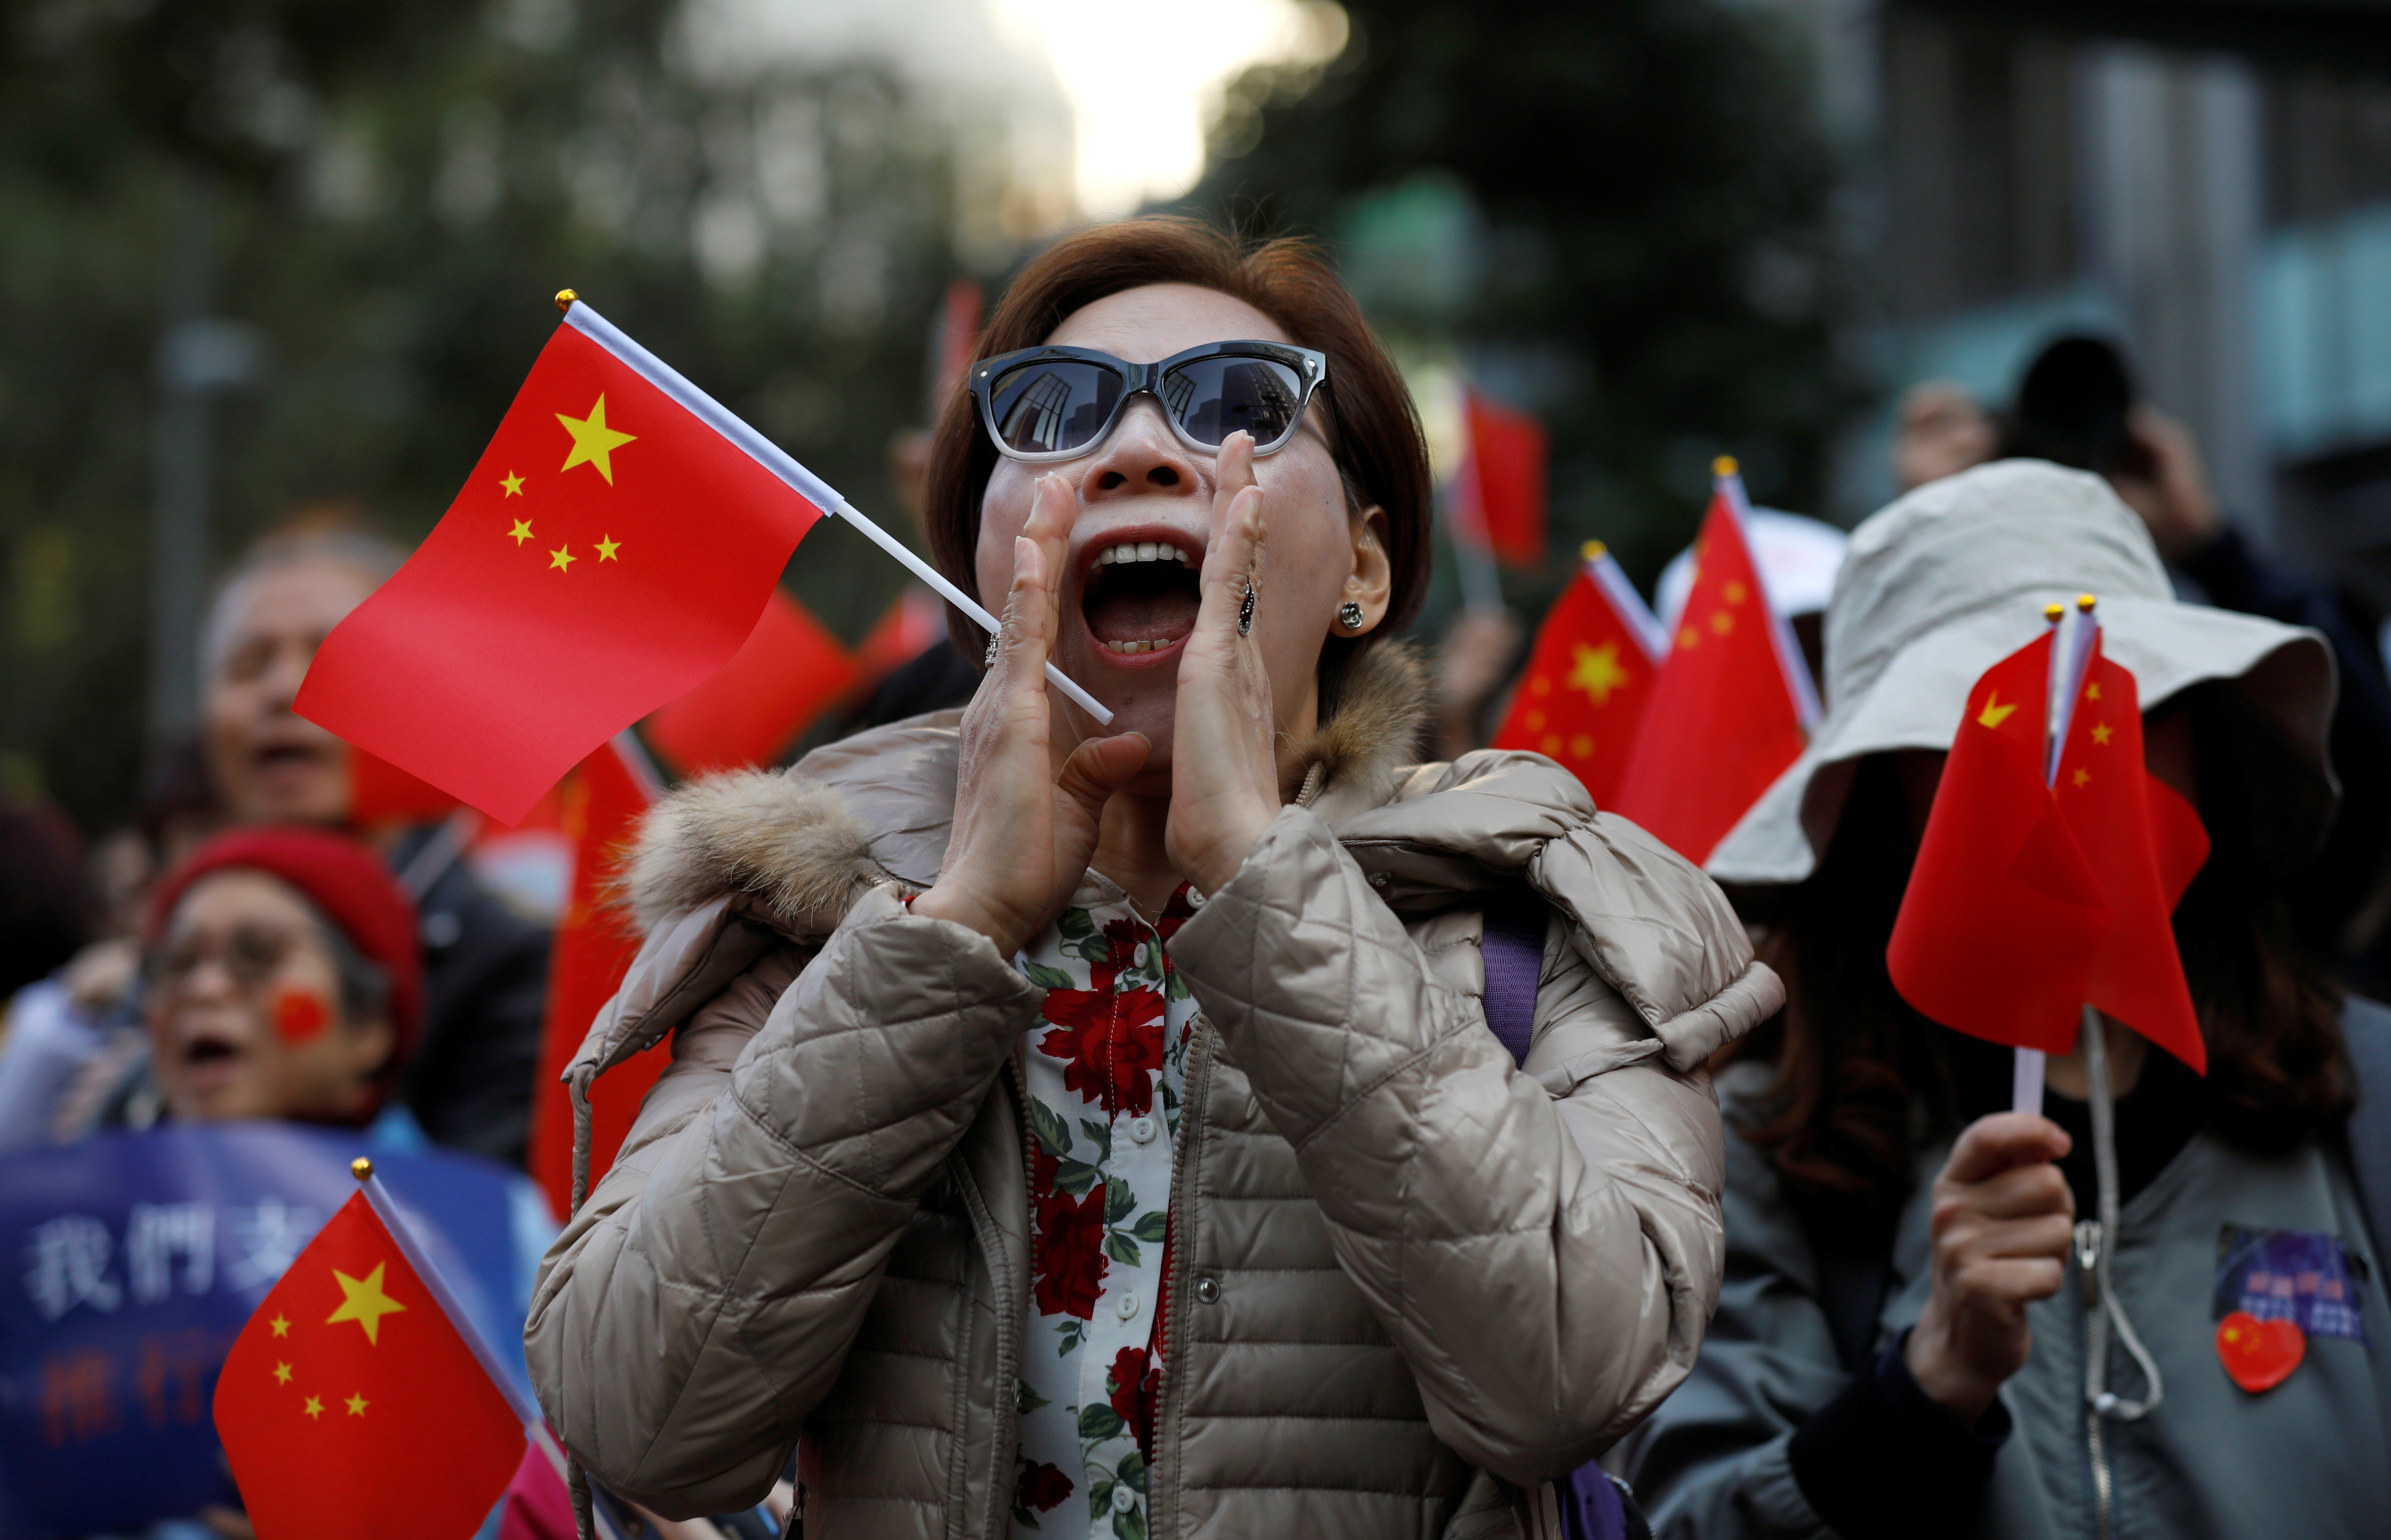 A pro-Beijing demonstrator shouts slogans as she holds a Chinese flag during a rally in Hong Kong on December 7. Photo: Reuters